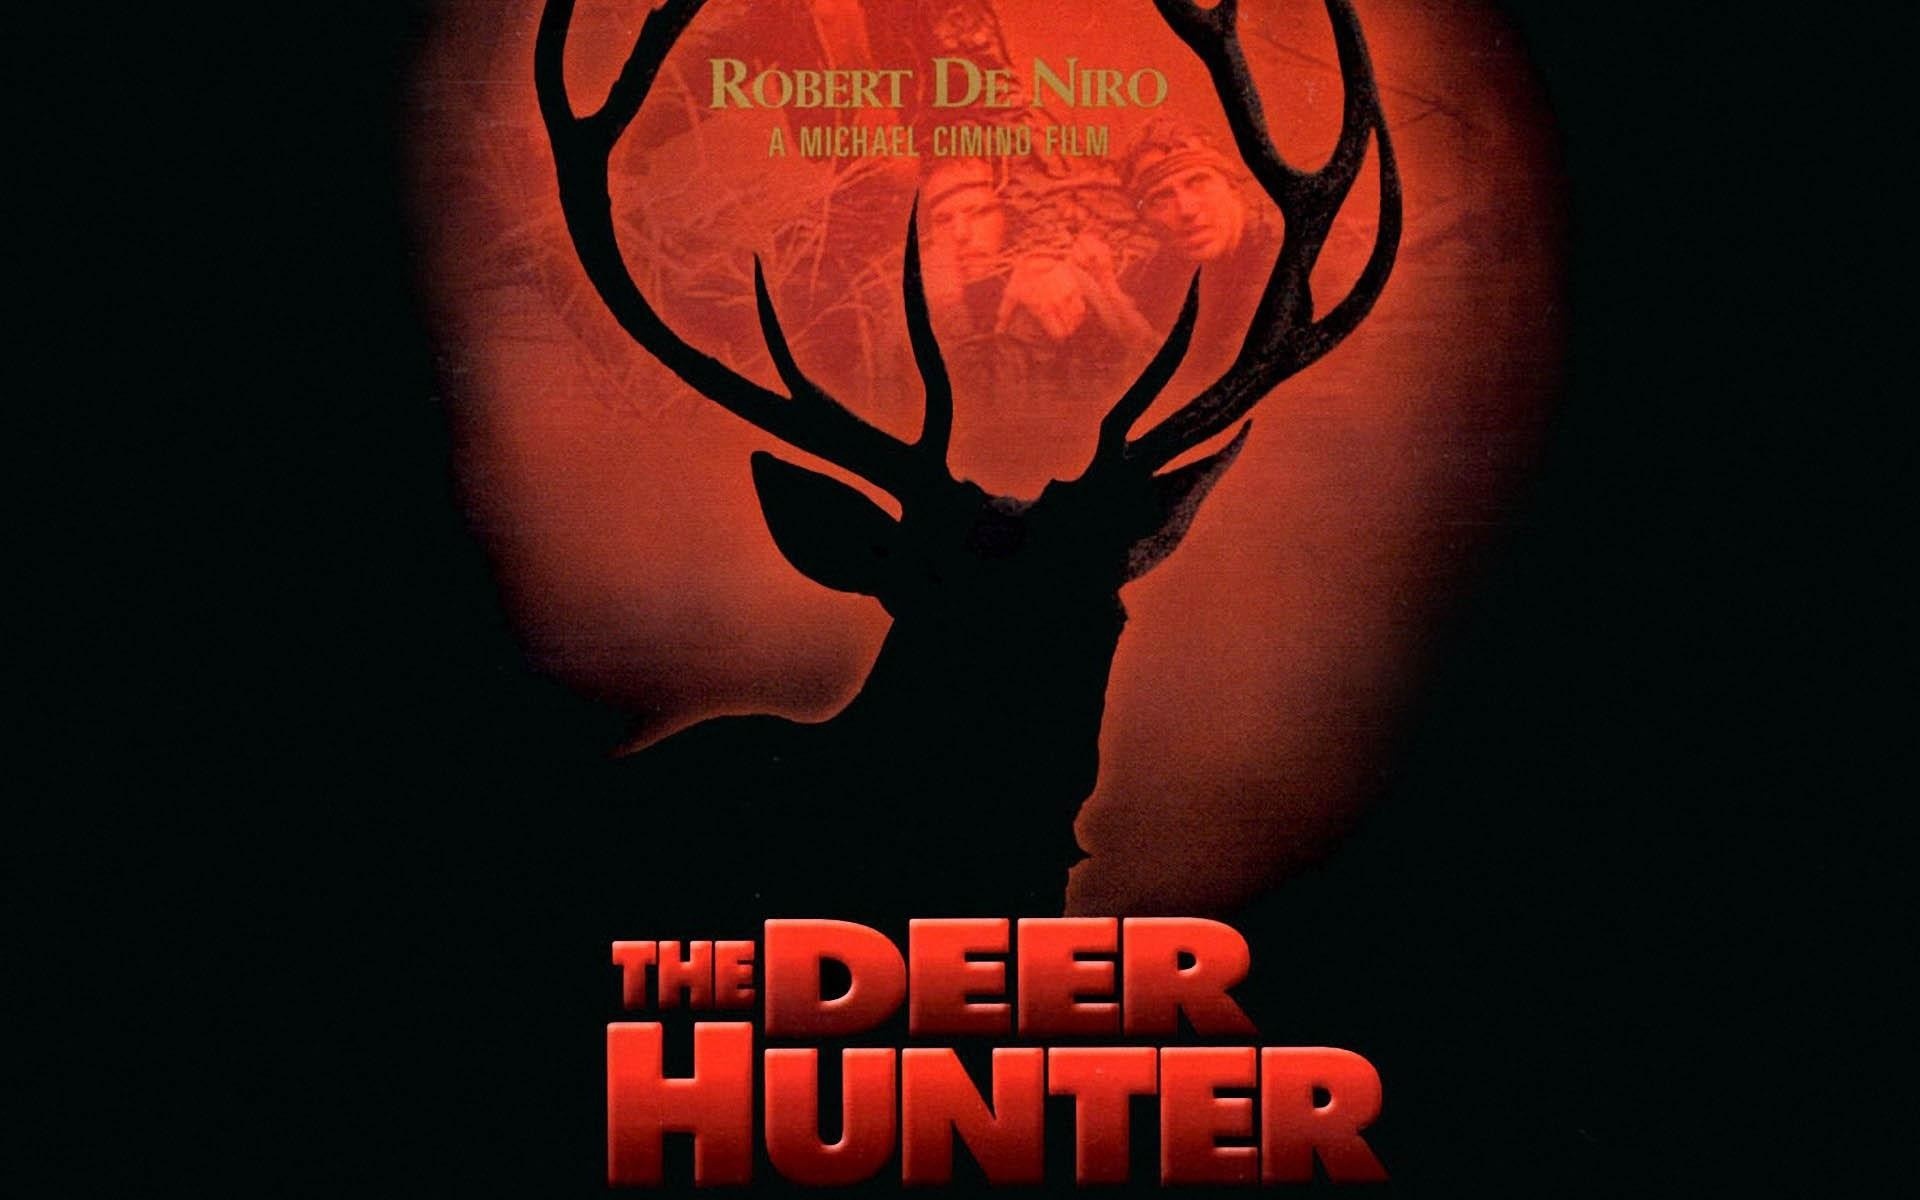 Deer Hunter movie quotes, Memorable lines, Iconic dialogue, Powerful moments, 1920x1200 HD Desktop